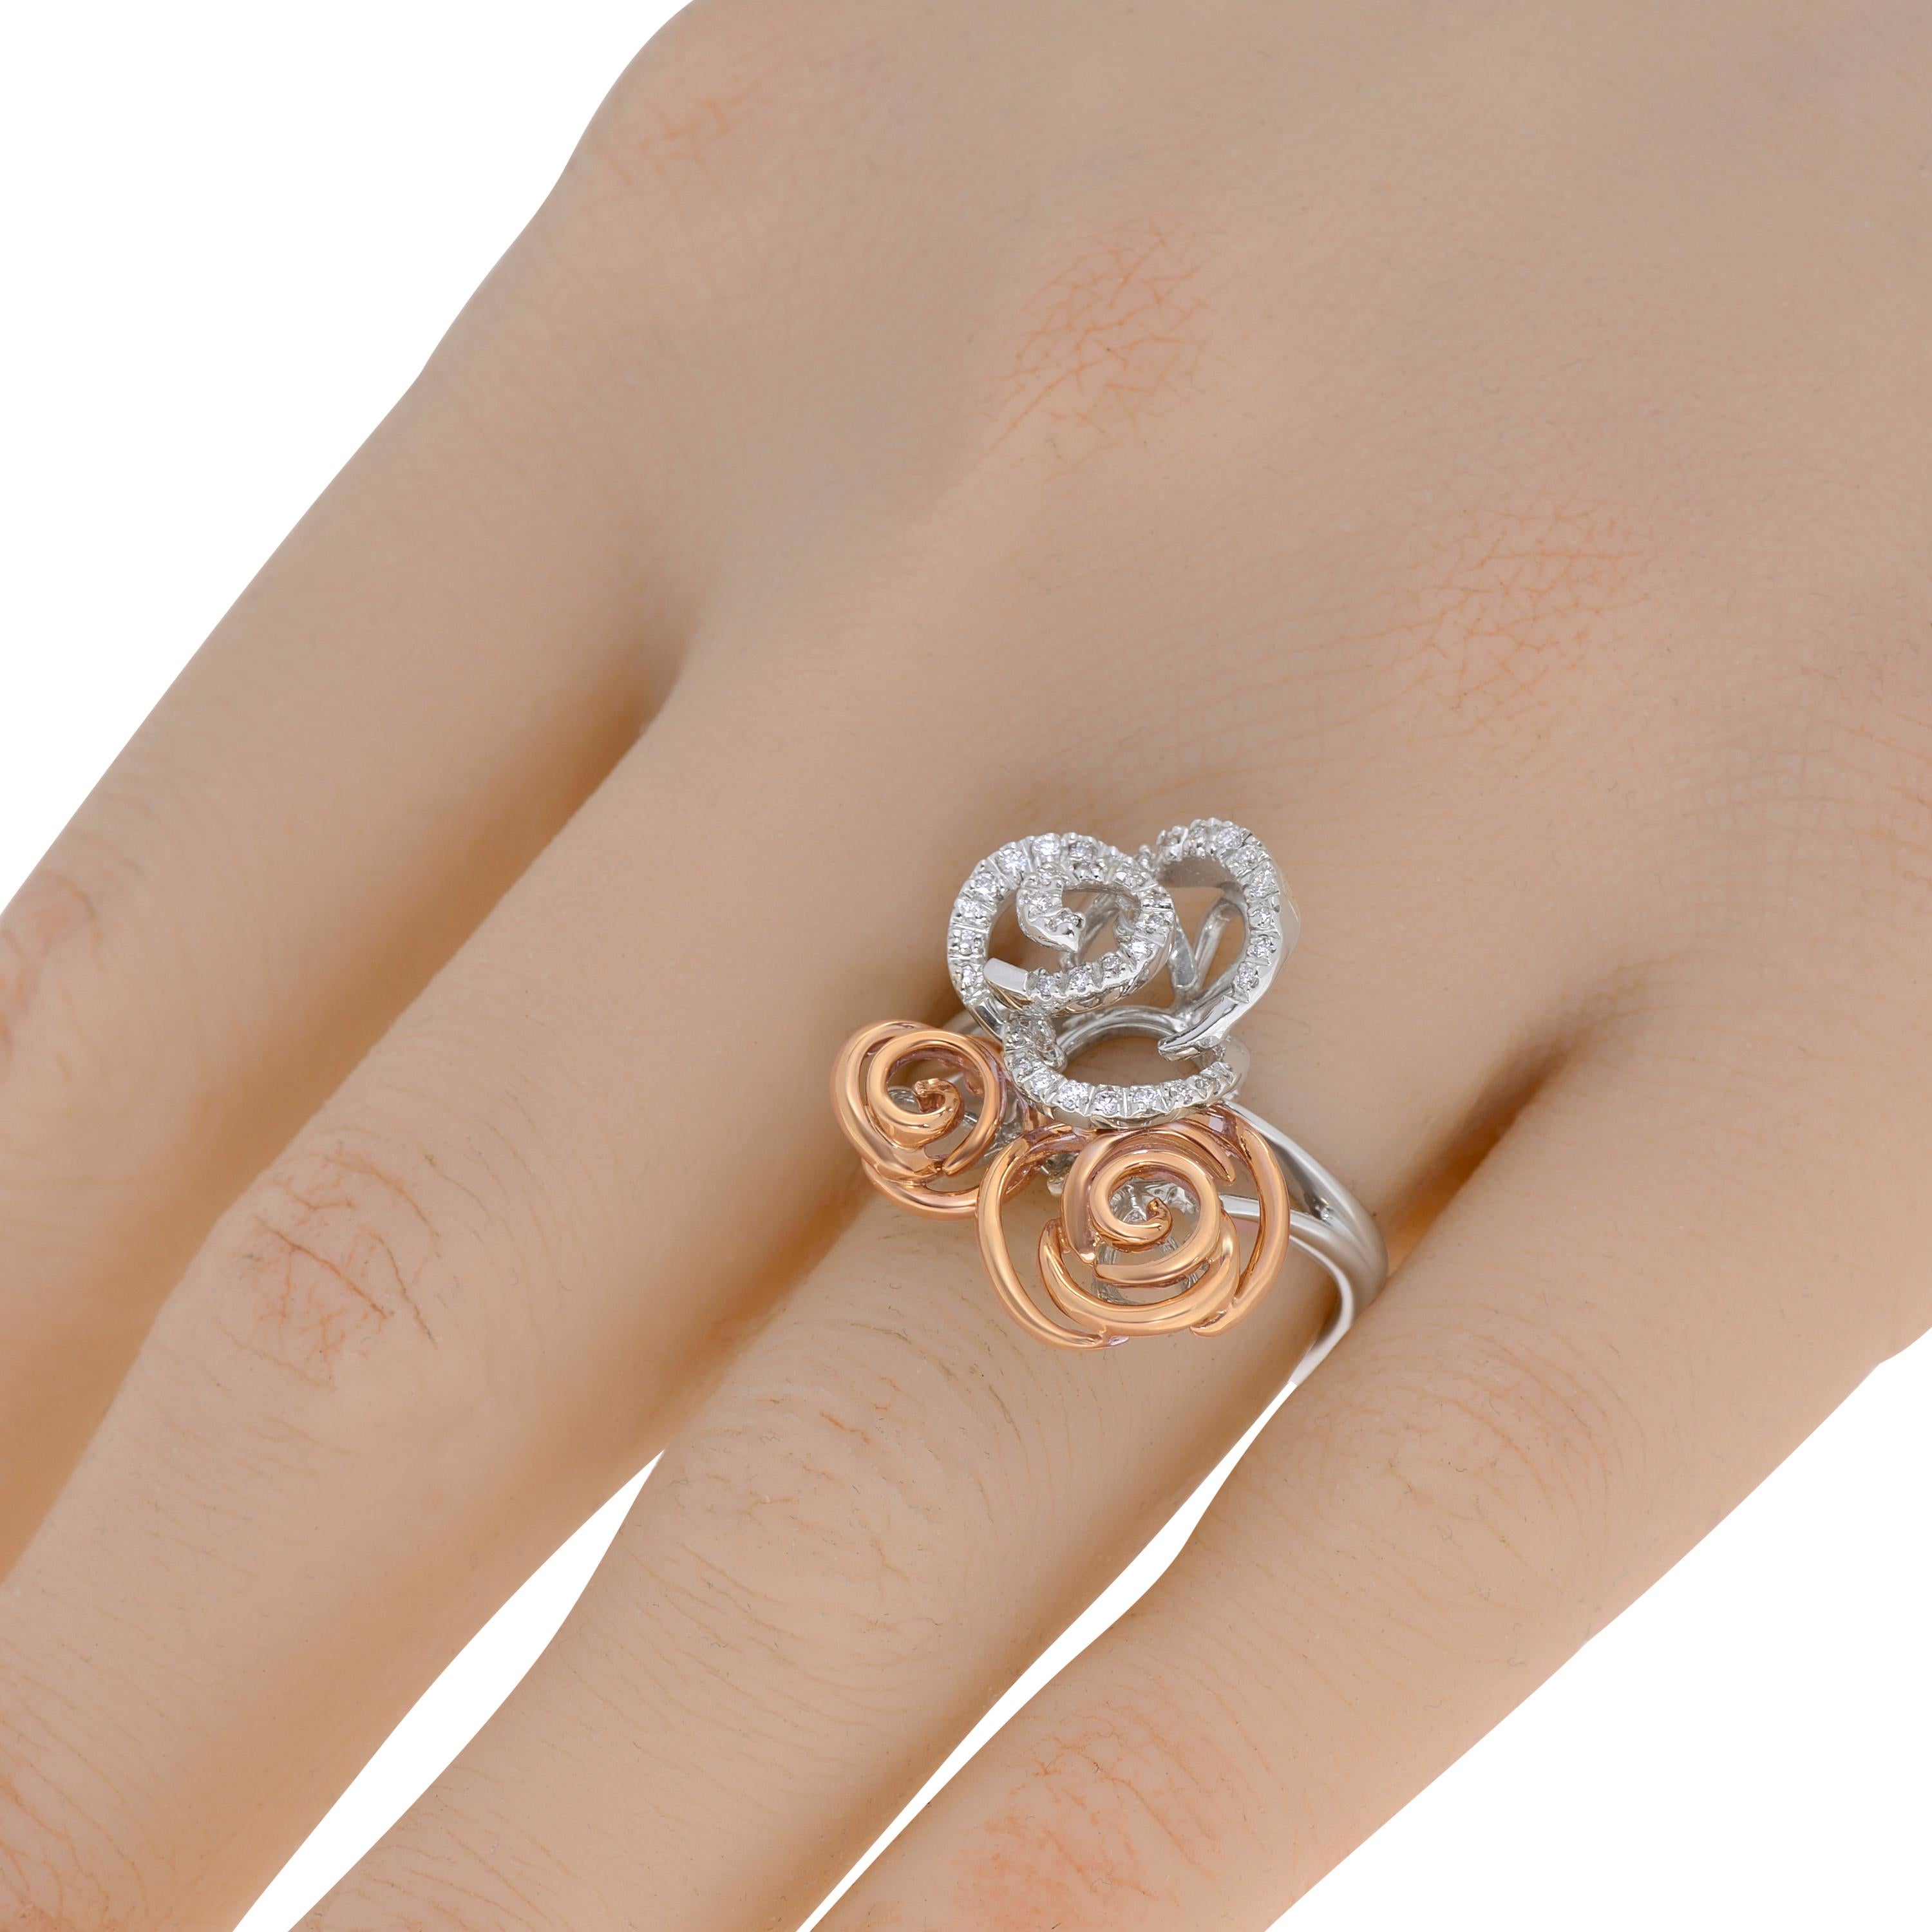 Damiani 18K white and rose gold ring features 0.19ct. tw. bar set diamonds in a two tone rose design. The ring size is 7.25 (55.1). The decoration size is 3/4